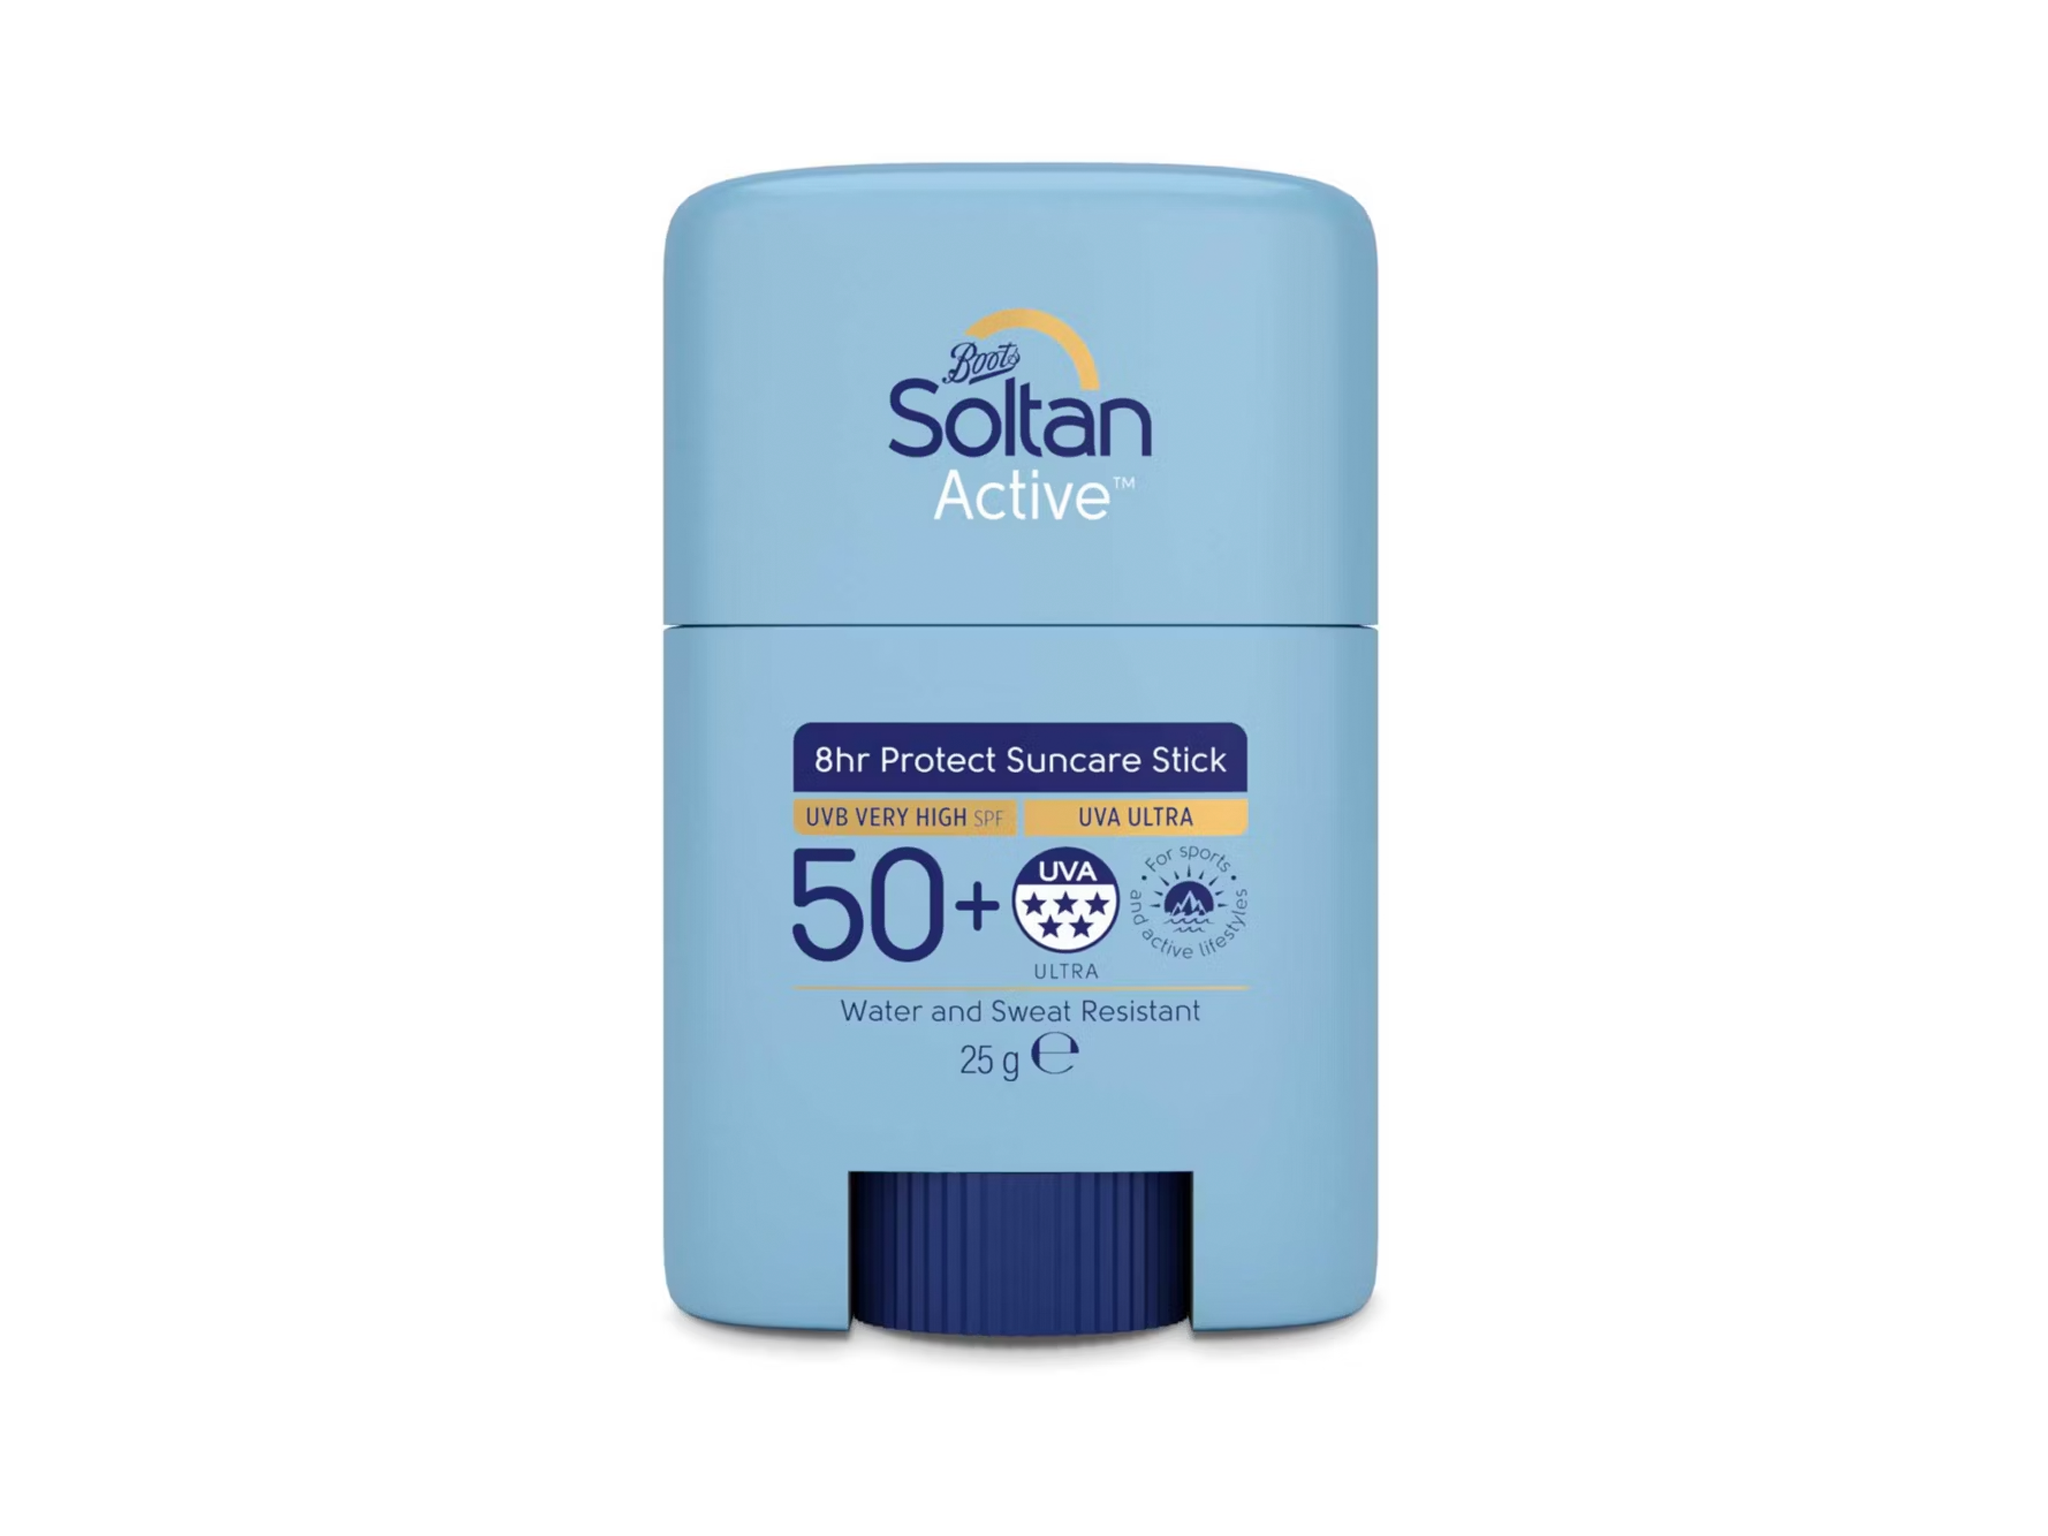 Soltan-active-sunscreen-stick-review-indybest